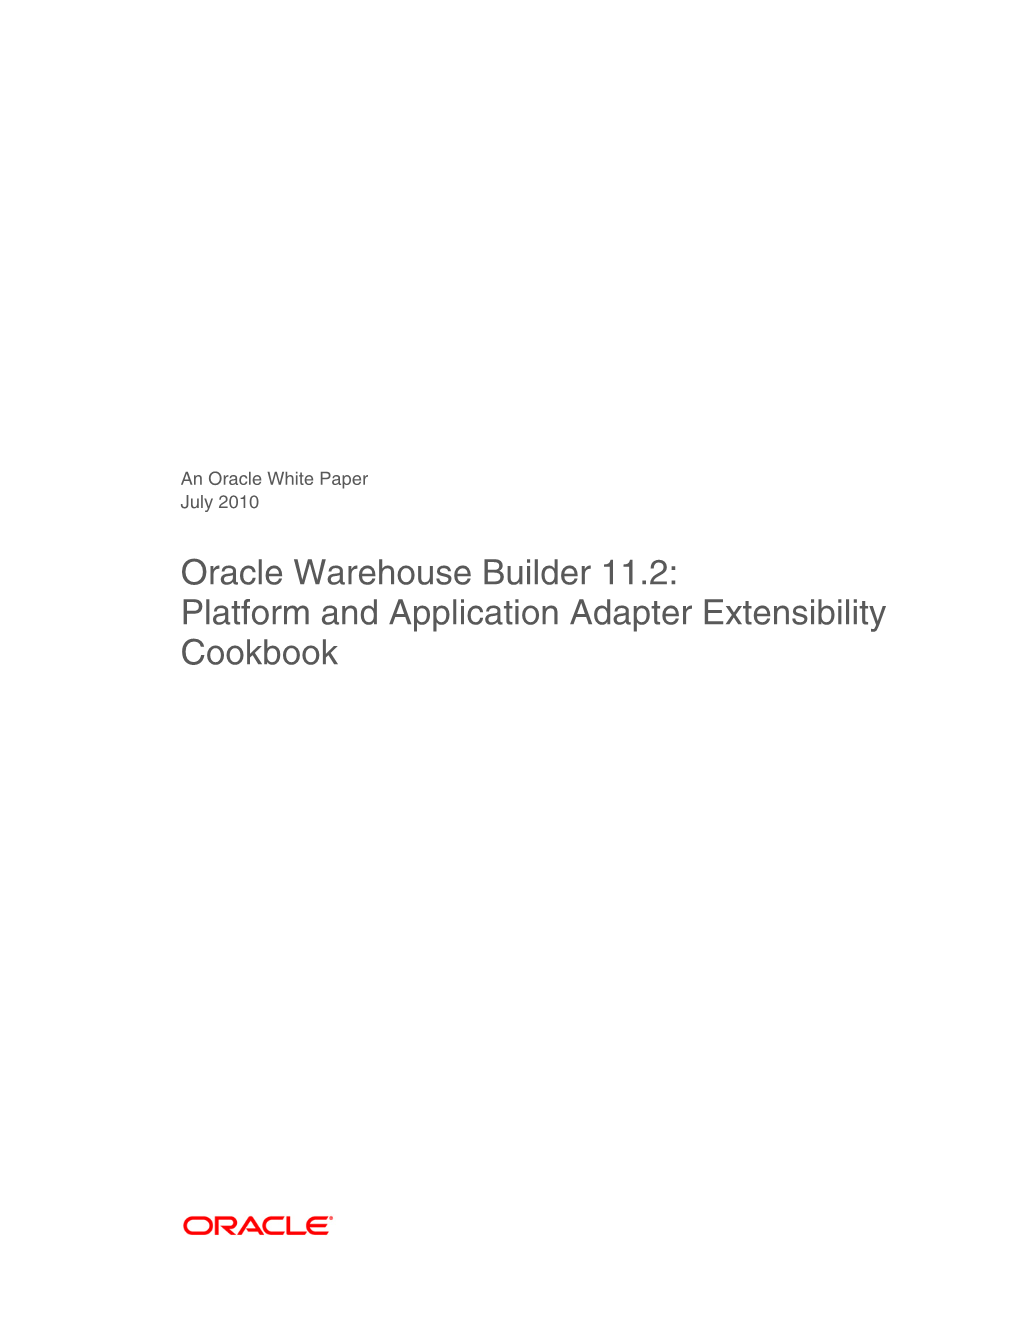 Oracle Warehouse Builder 11.2: Platform and Application Adapter Extensibility Cookbook